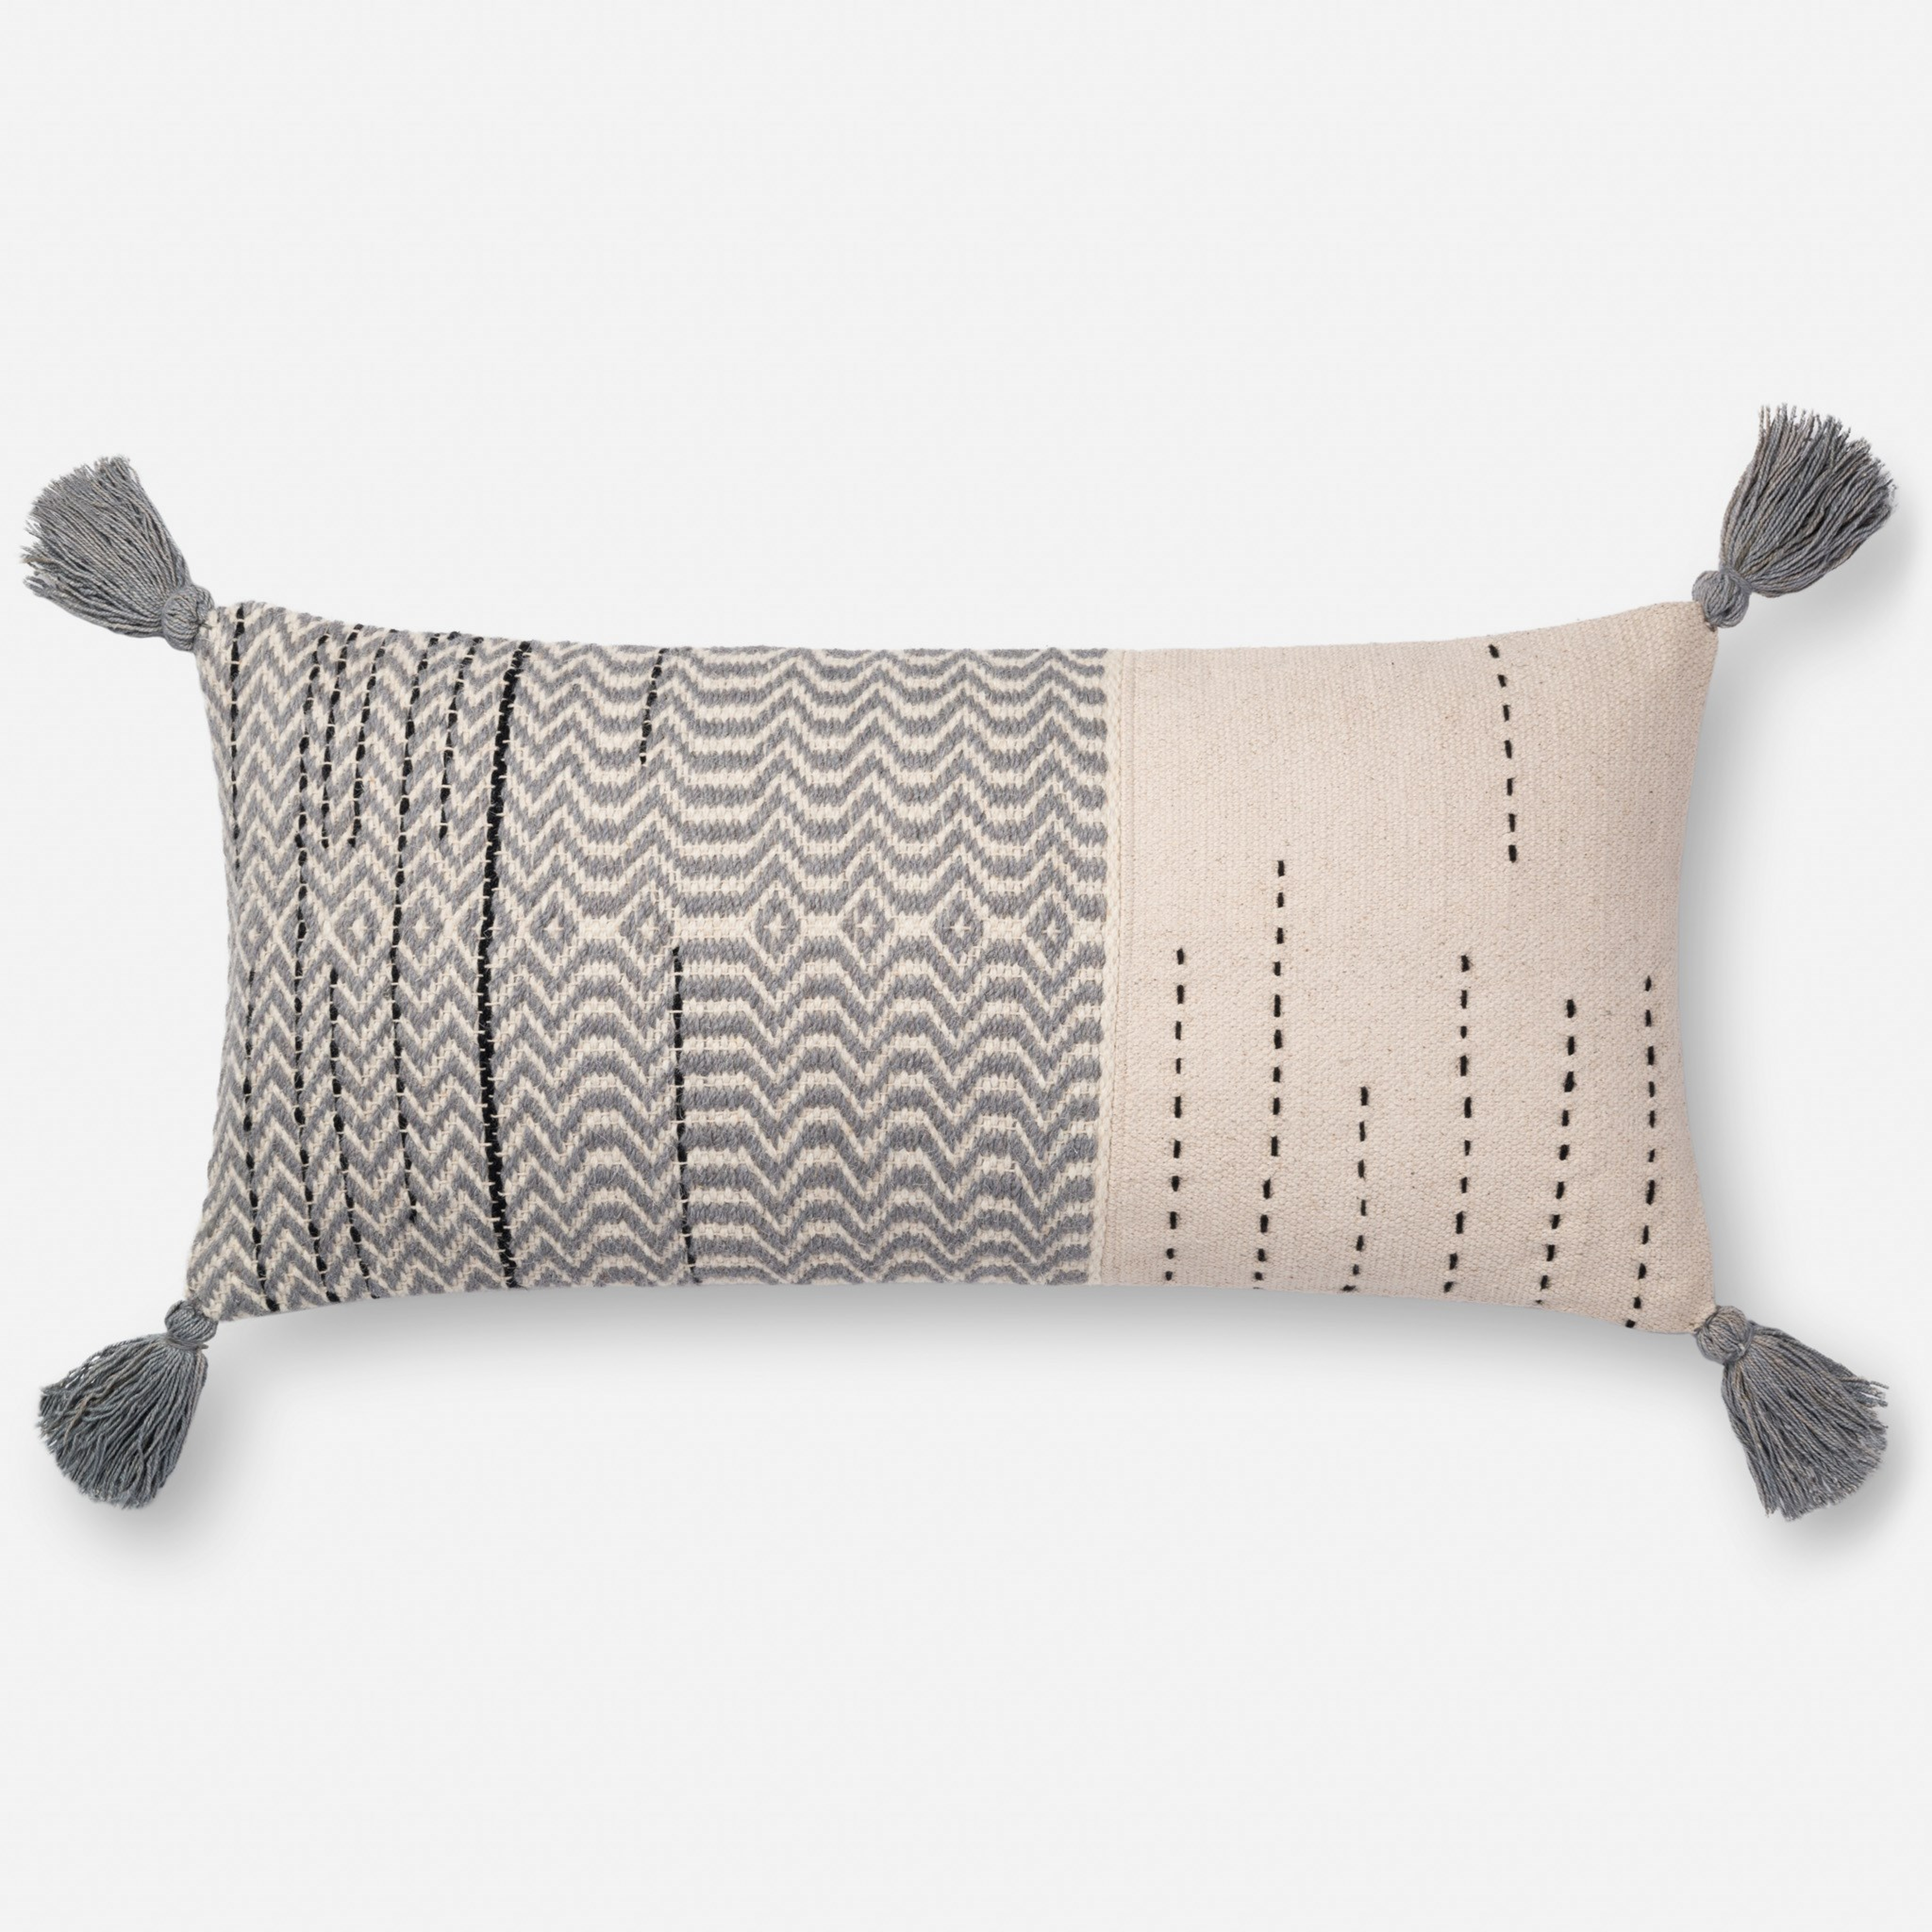 PILLOWS - IVORY / GREY - Loloi Rugs